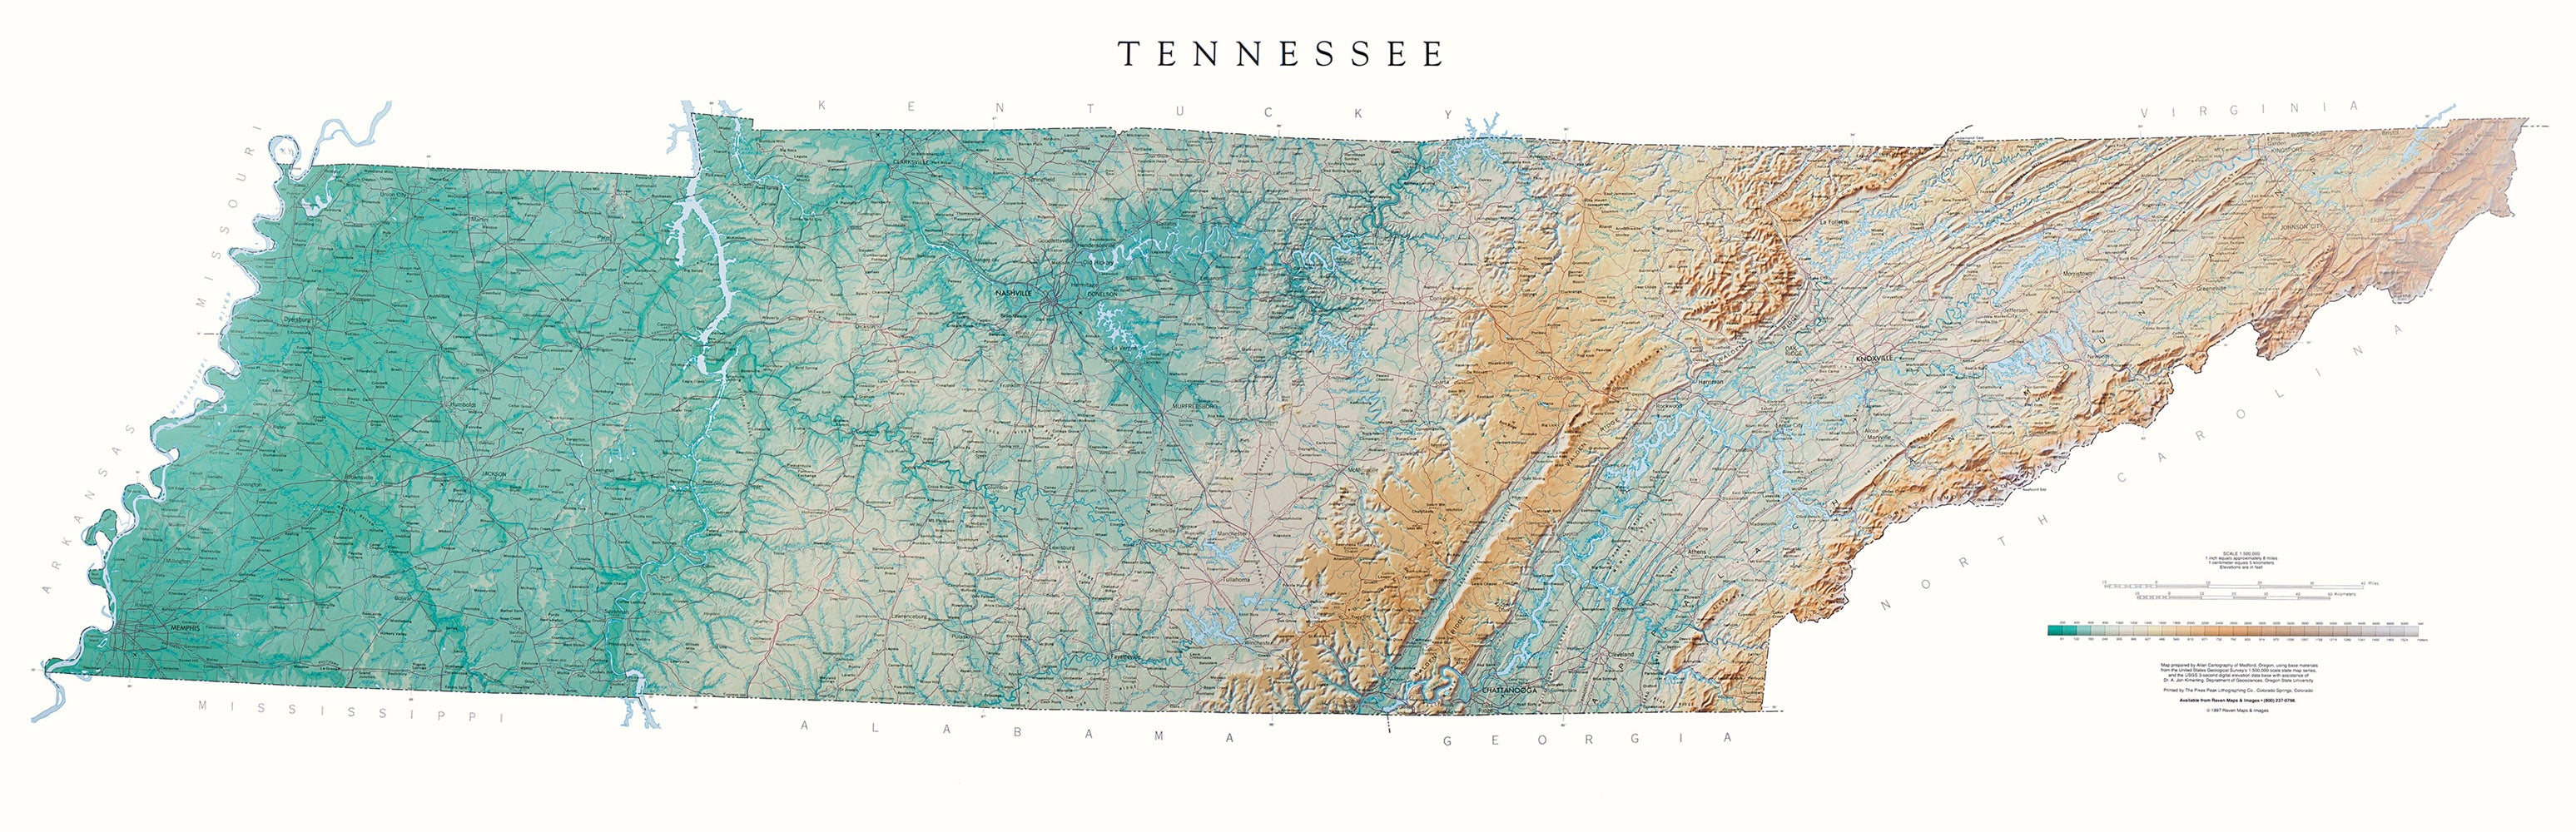 Tennessee Topographical Wall Map By Raven Maps 21 X 65 Geomart 9385